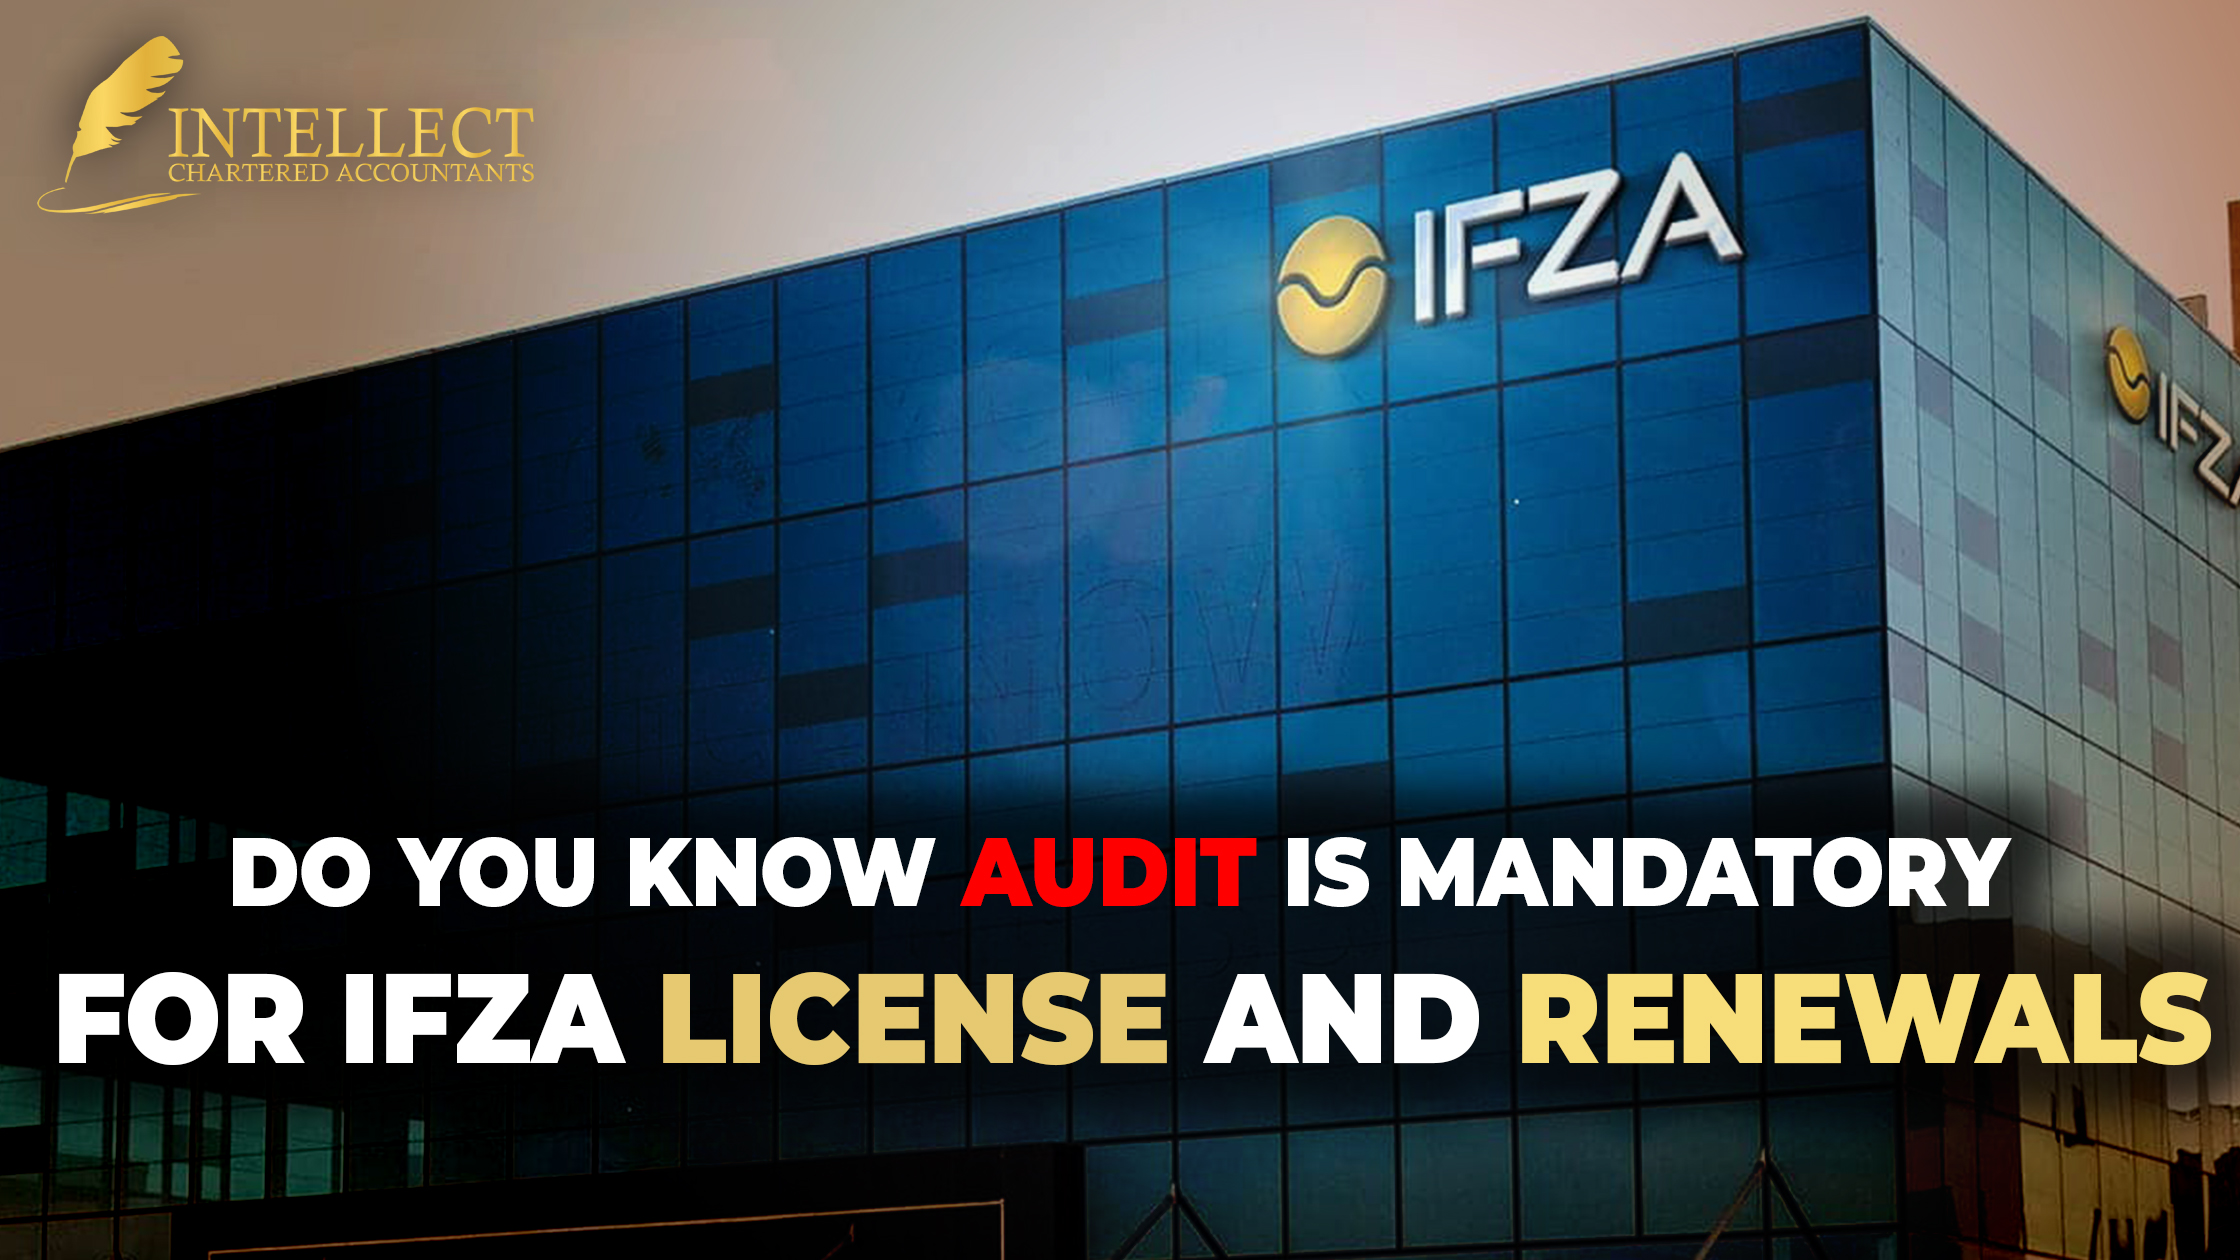 DO YOU KNOW AUDIT IS MANDATORY FOR IFZA LICENSE AND RENEWALS